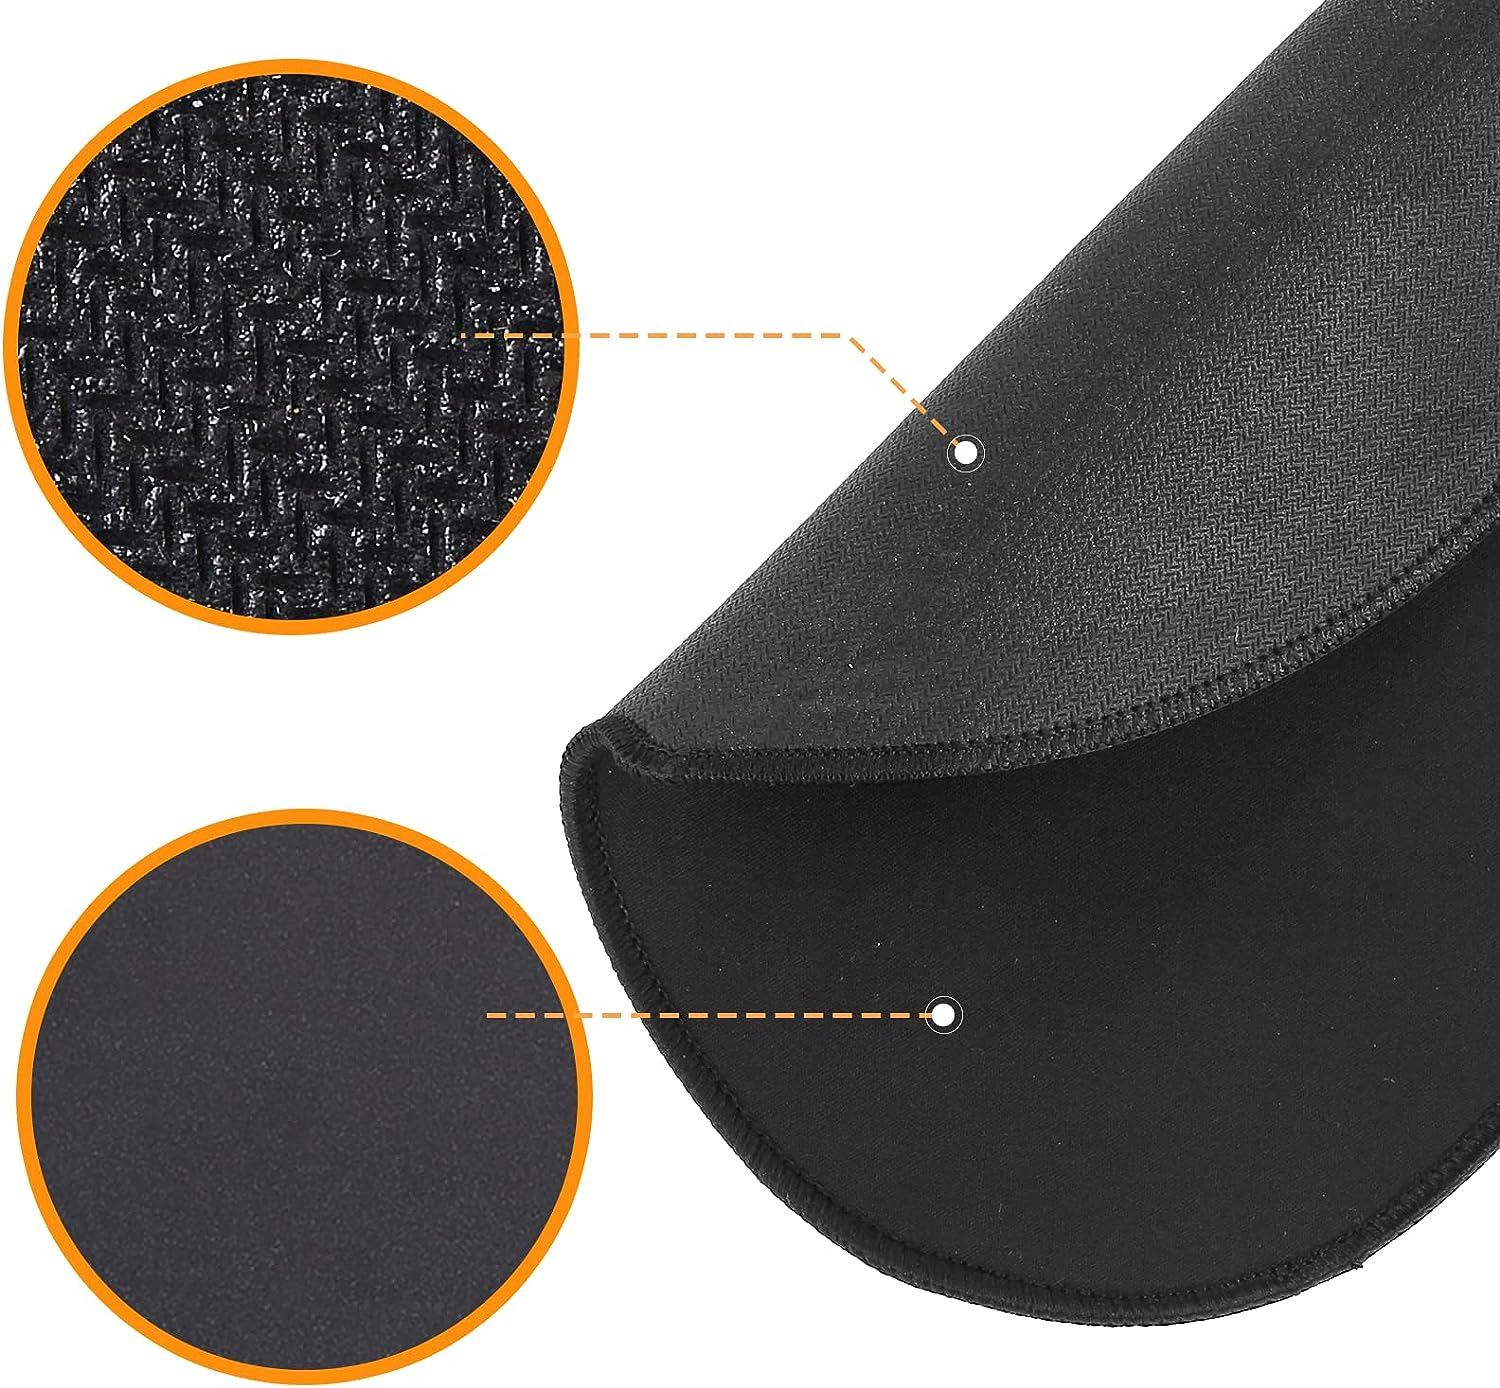 Mouse Pad,Slide Mat for Keurig K-Classic Coffee Maker Review